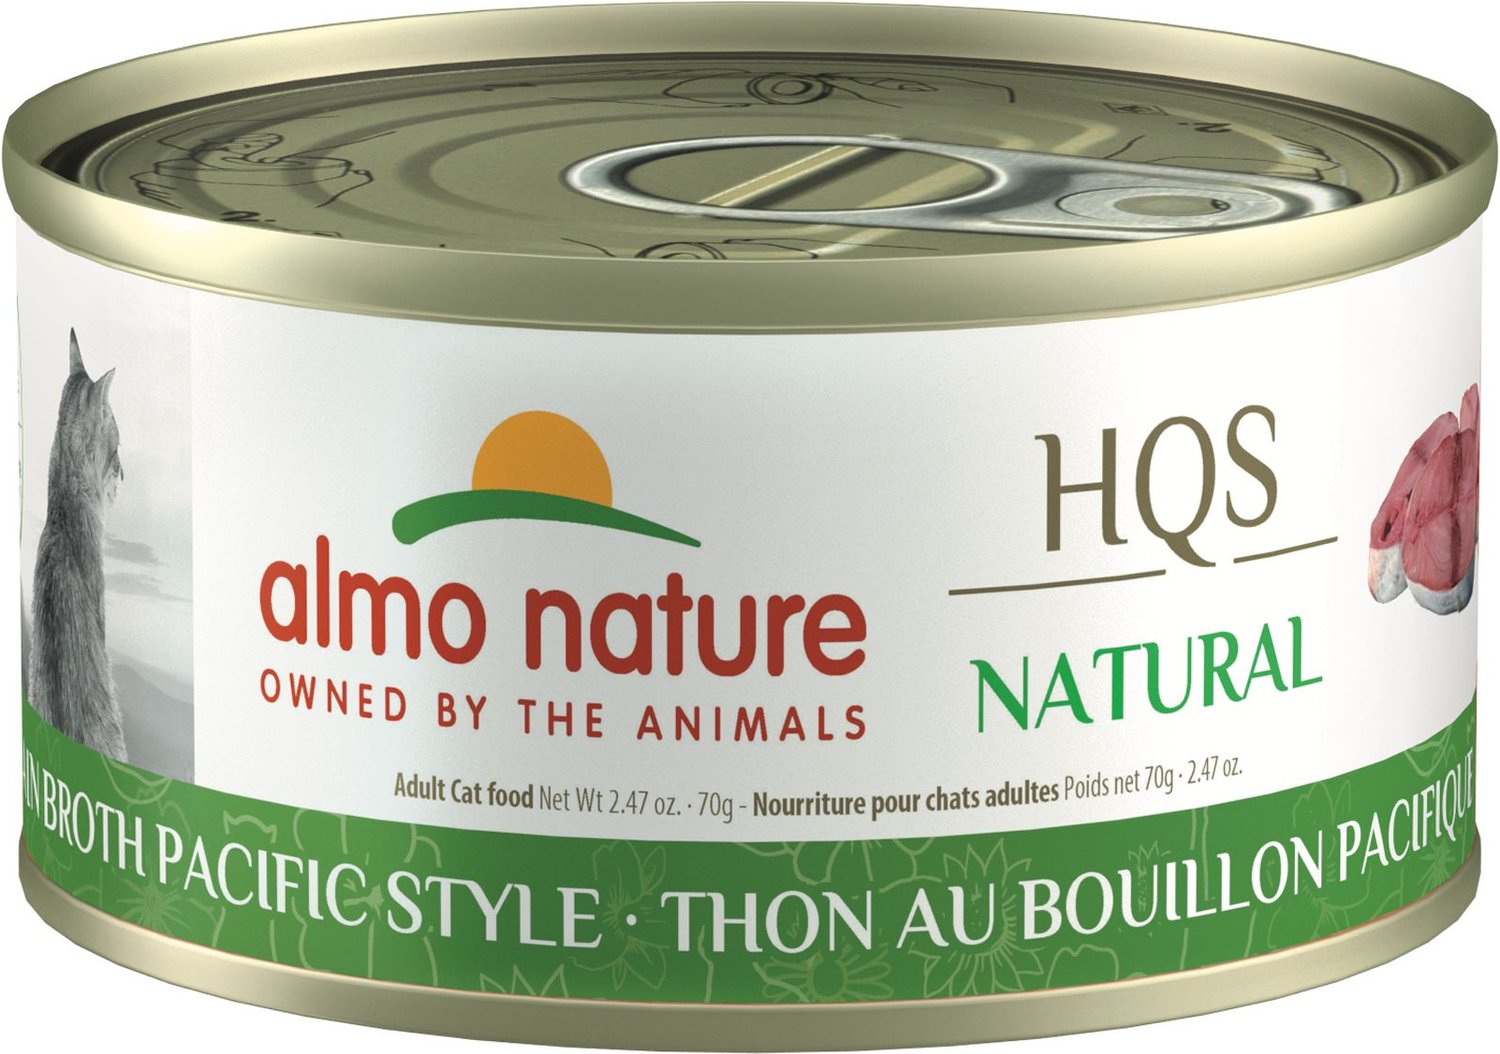 ALMO NATURE HQS Natural Tuna in Broth Pacific Style Grain-Free Canned Cat  Food, 2.47-oz, case of 24 - Chewy.com